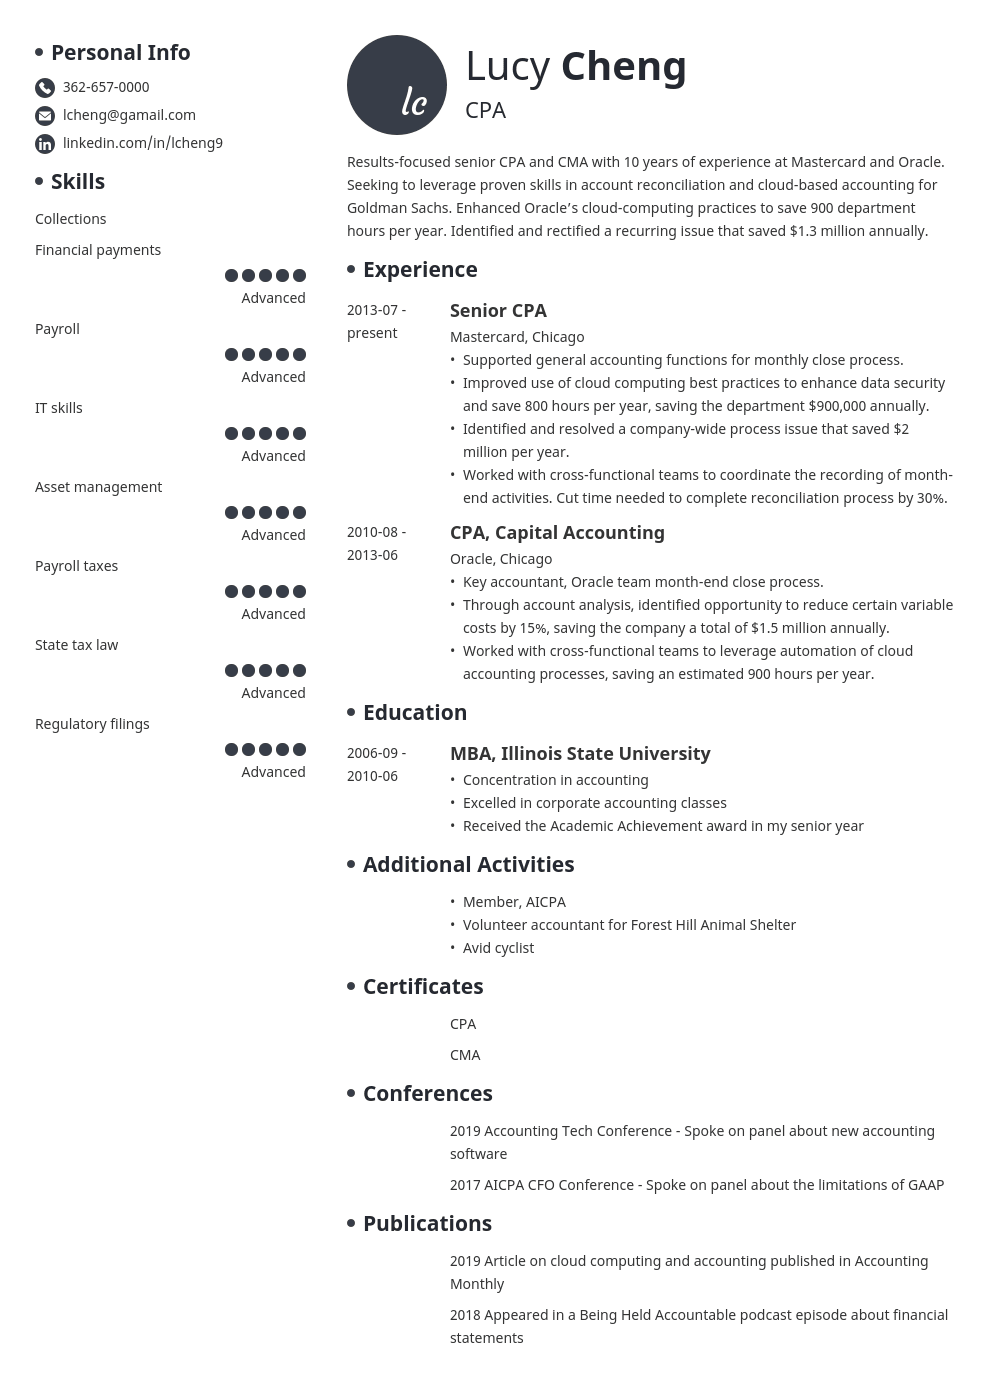 How To Save Money with resume?